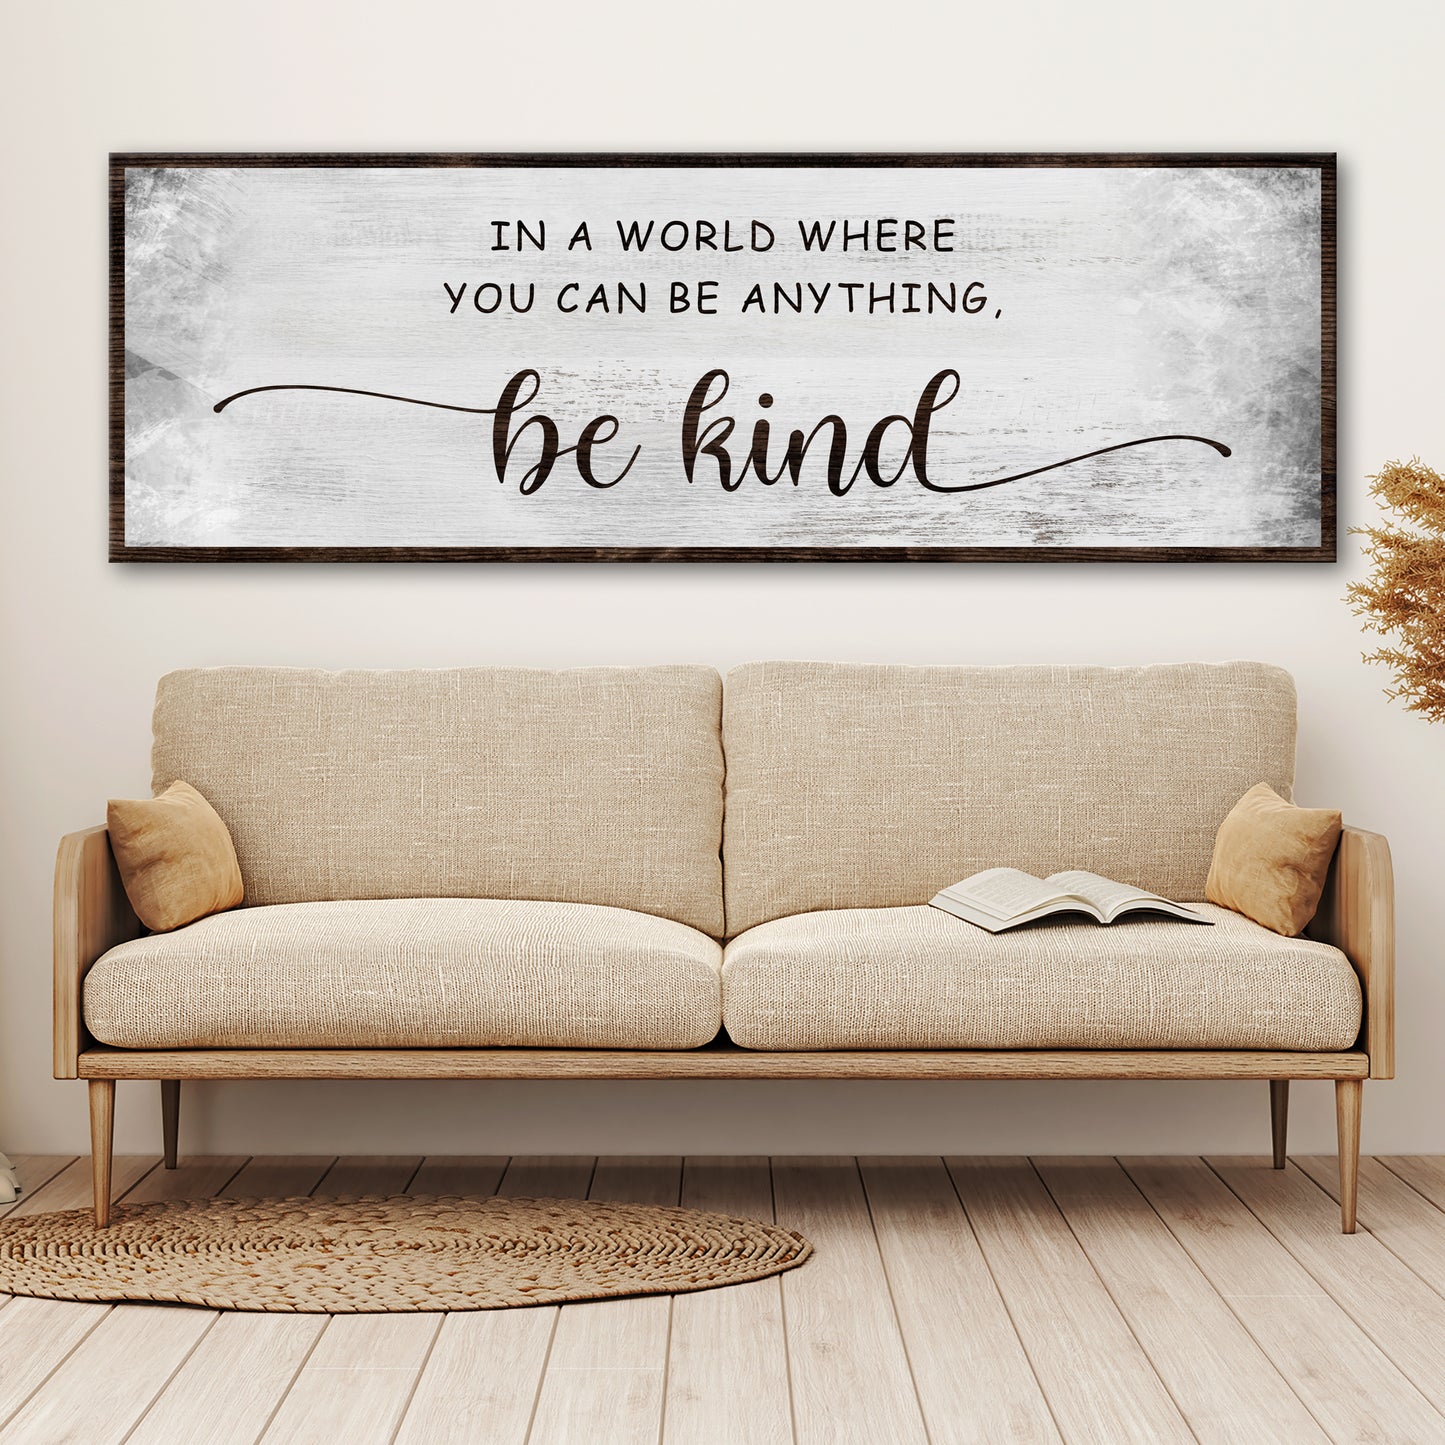 Be kind Sign V - Image by Tailored Canvases